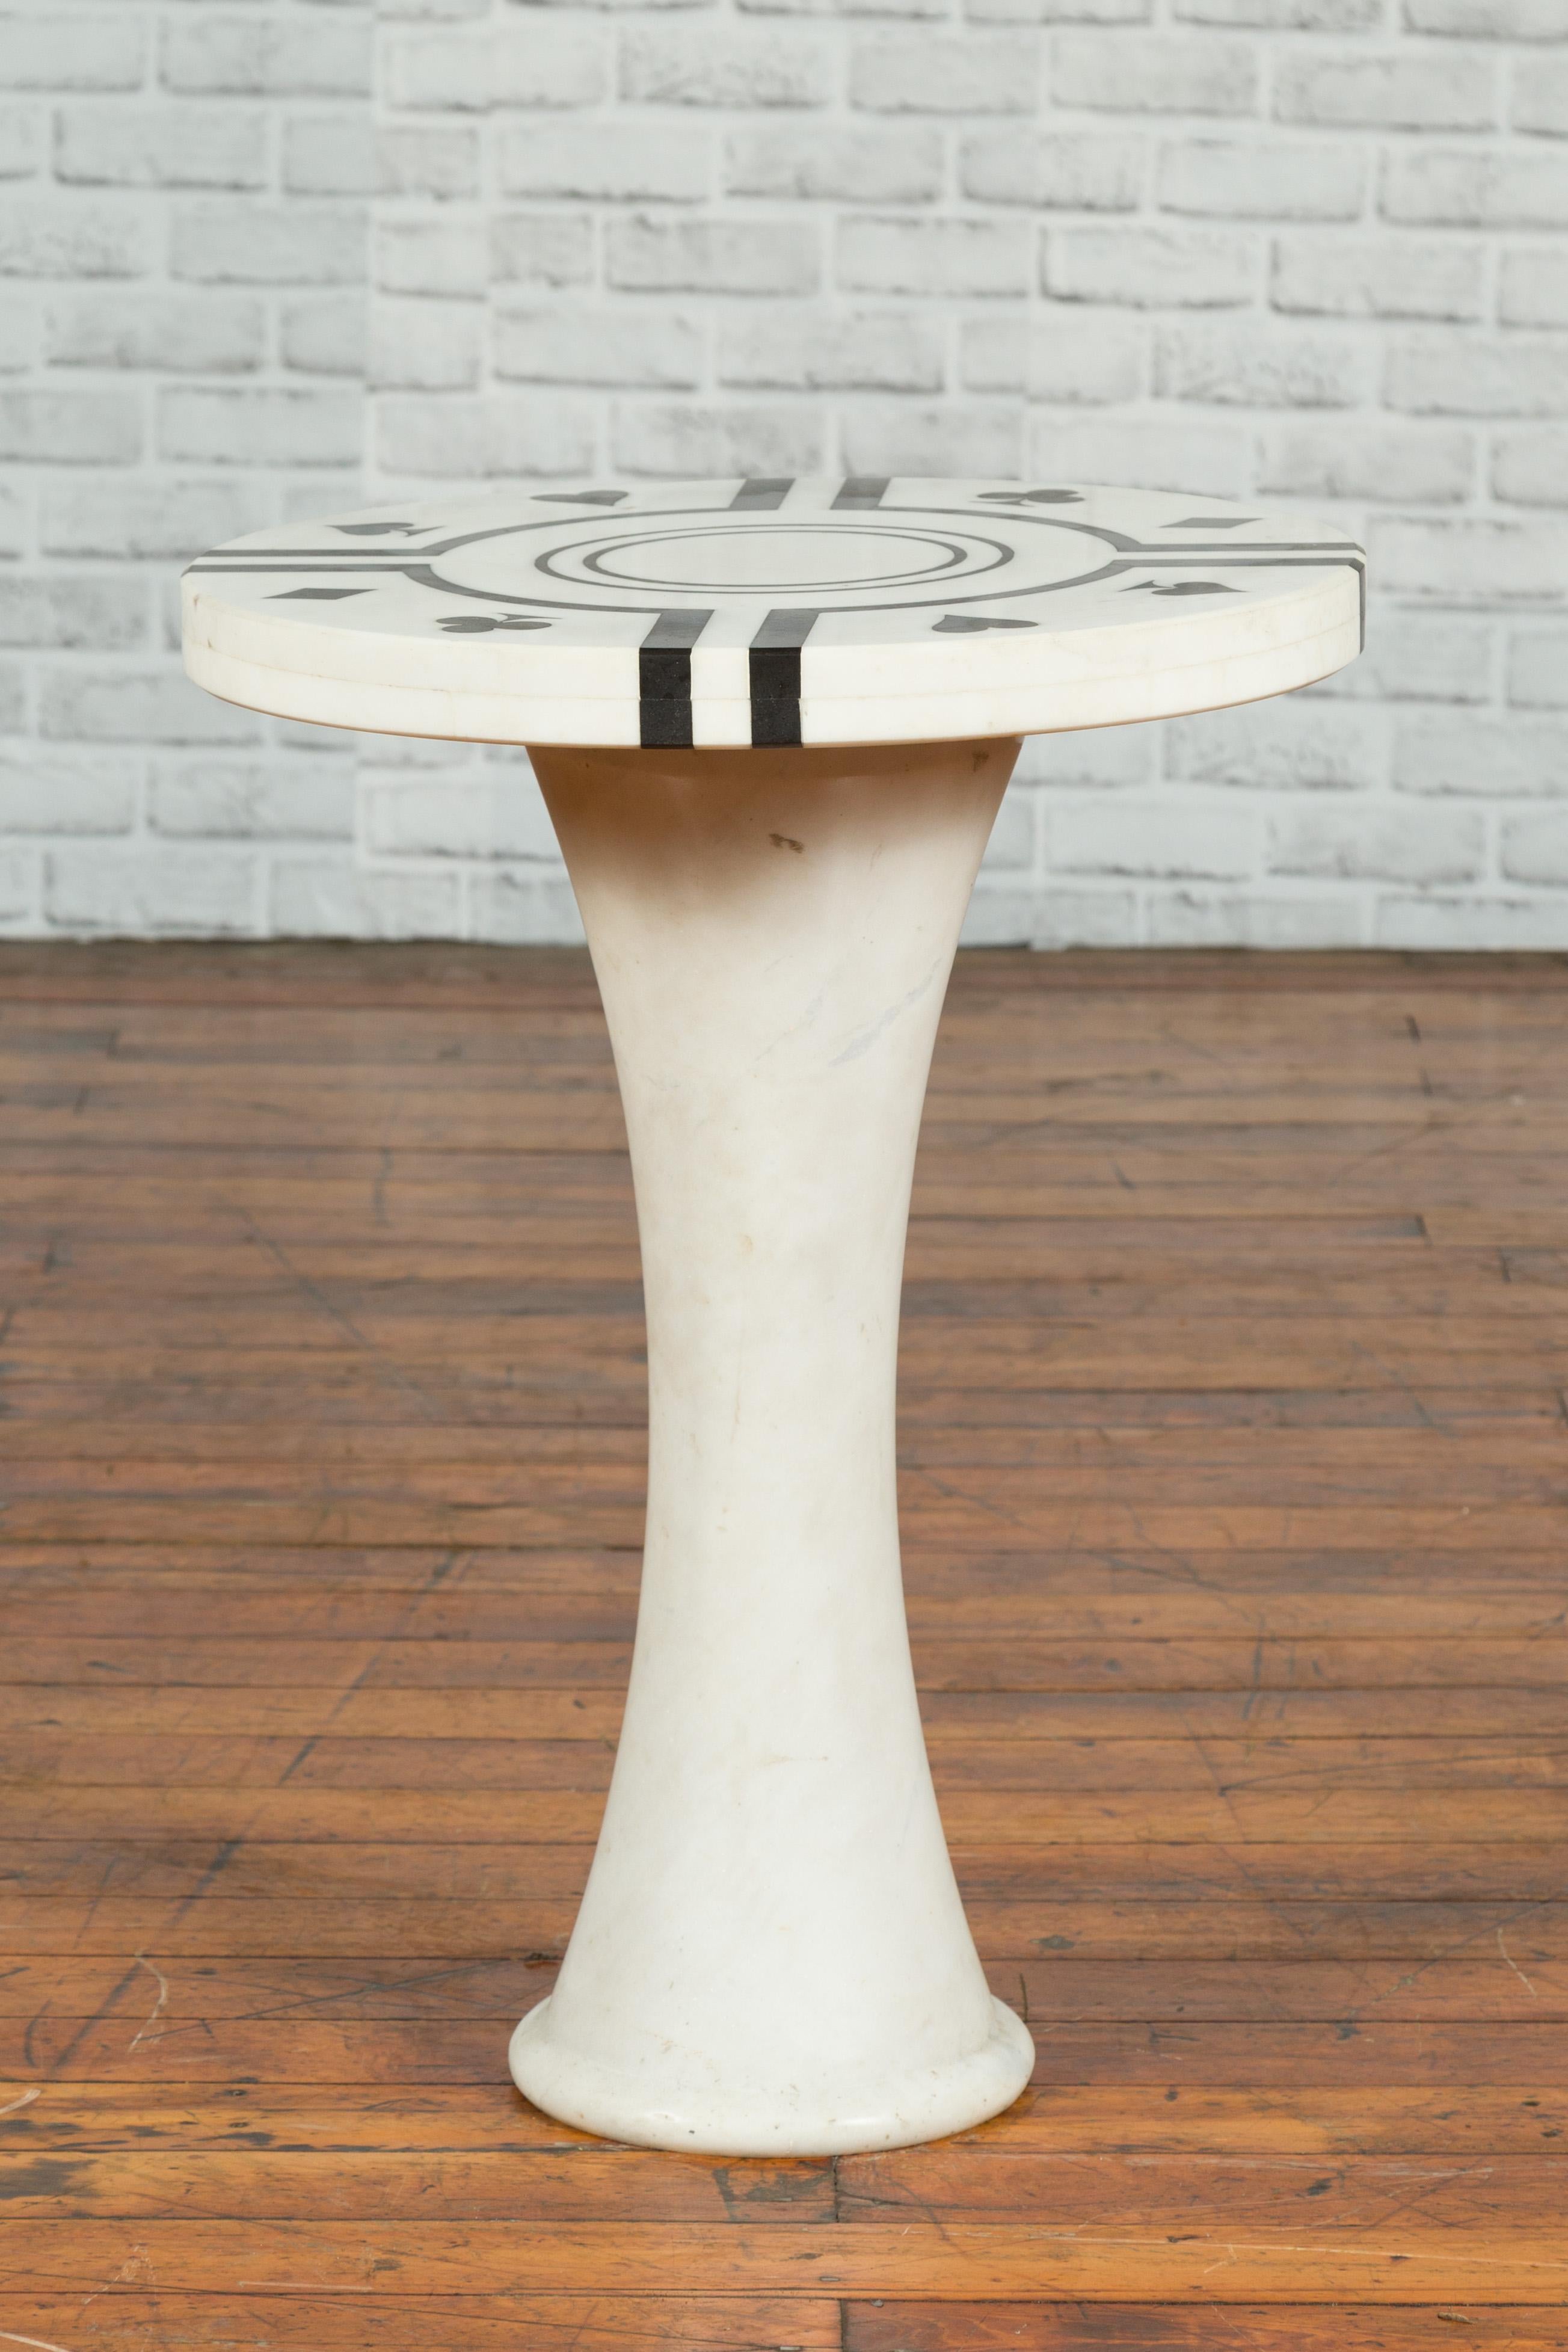 20th Century White Marble Side Table with Poker Design Round Top and Pedestal Hourglass Base For Sale